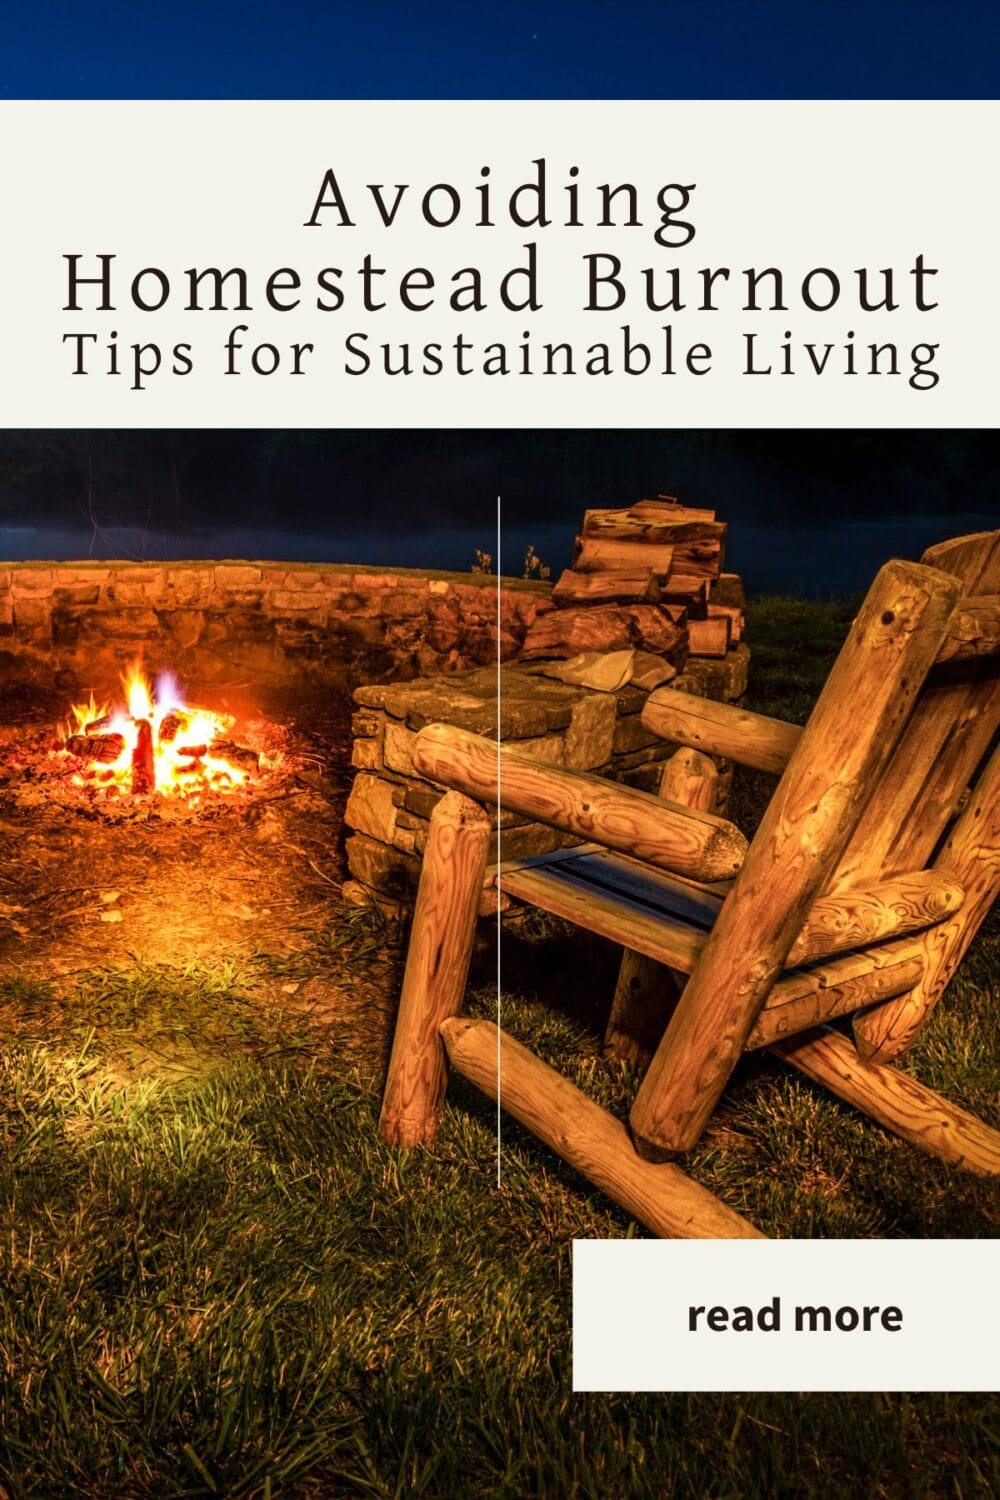 A Pinterest-friendly graphic for my blog post on avoiding homestead burnout.